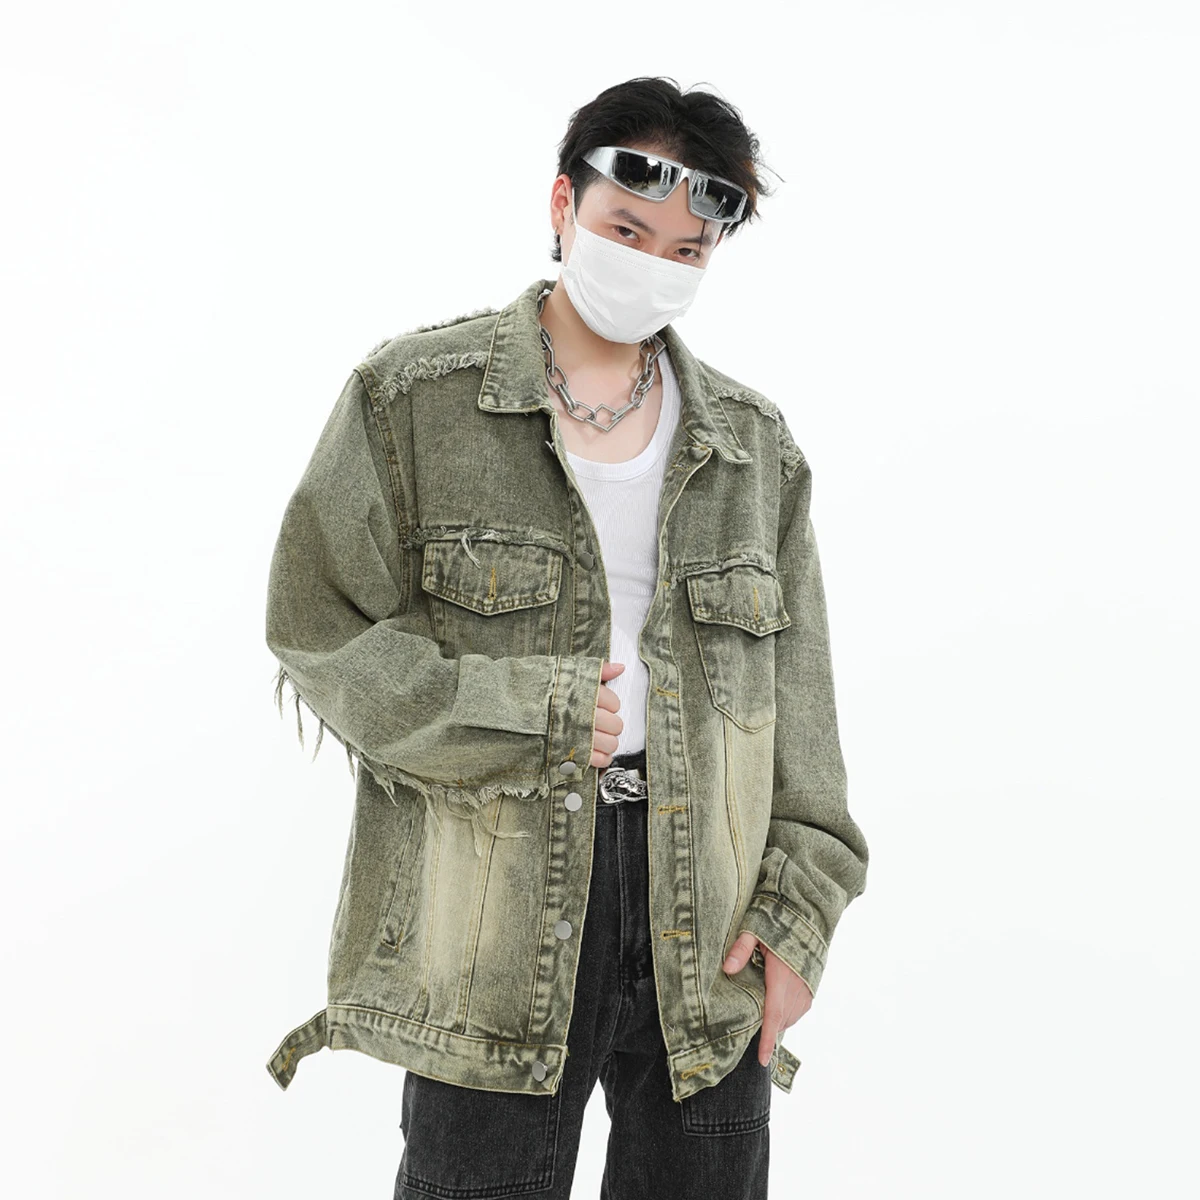 

Vintage Washed Destroyed Jeans Jackets for Men Raw Edge Ripped Distressed Denim Jackets Coats Street Wear Oversize Male Clothing